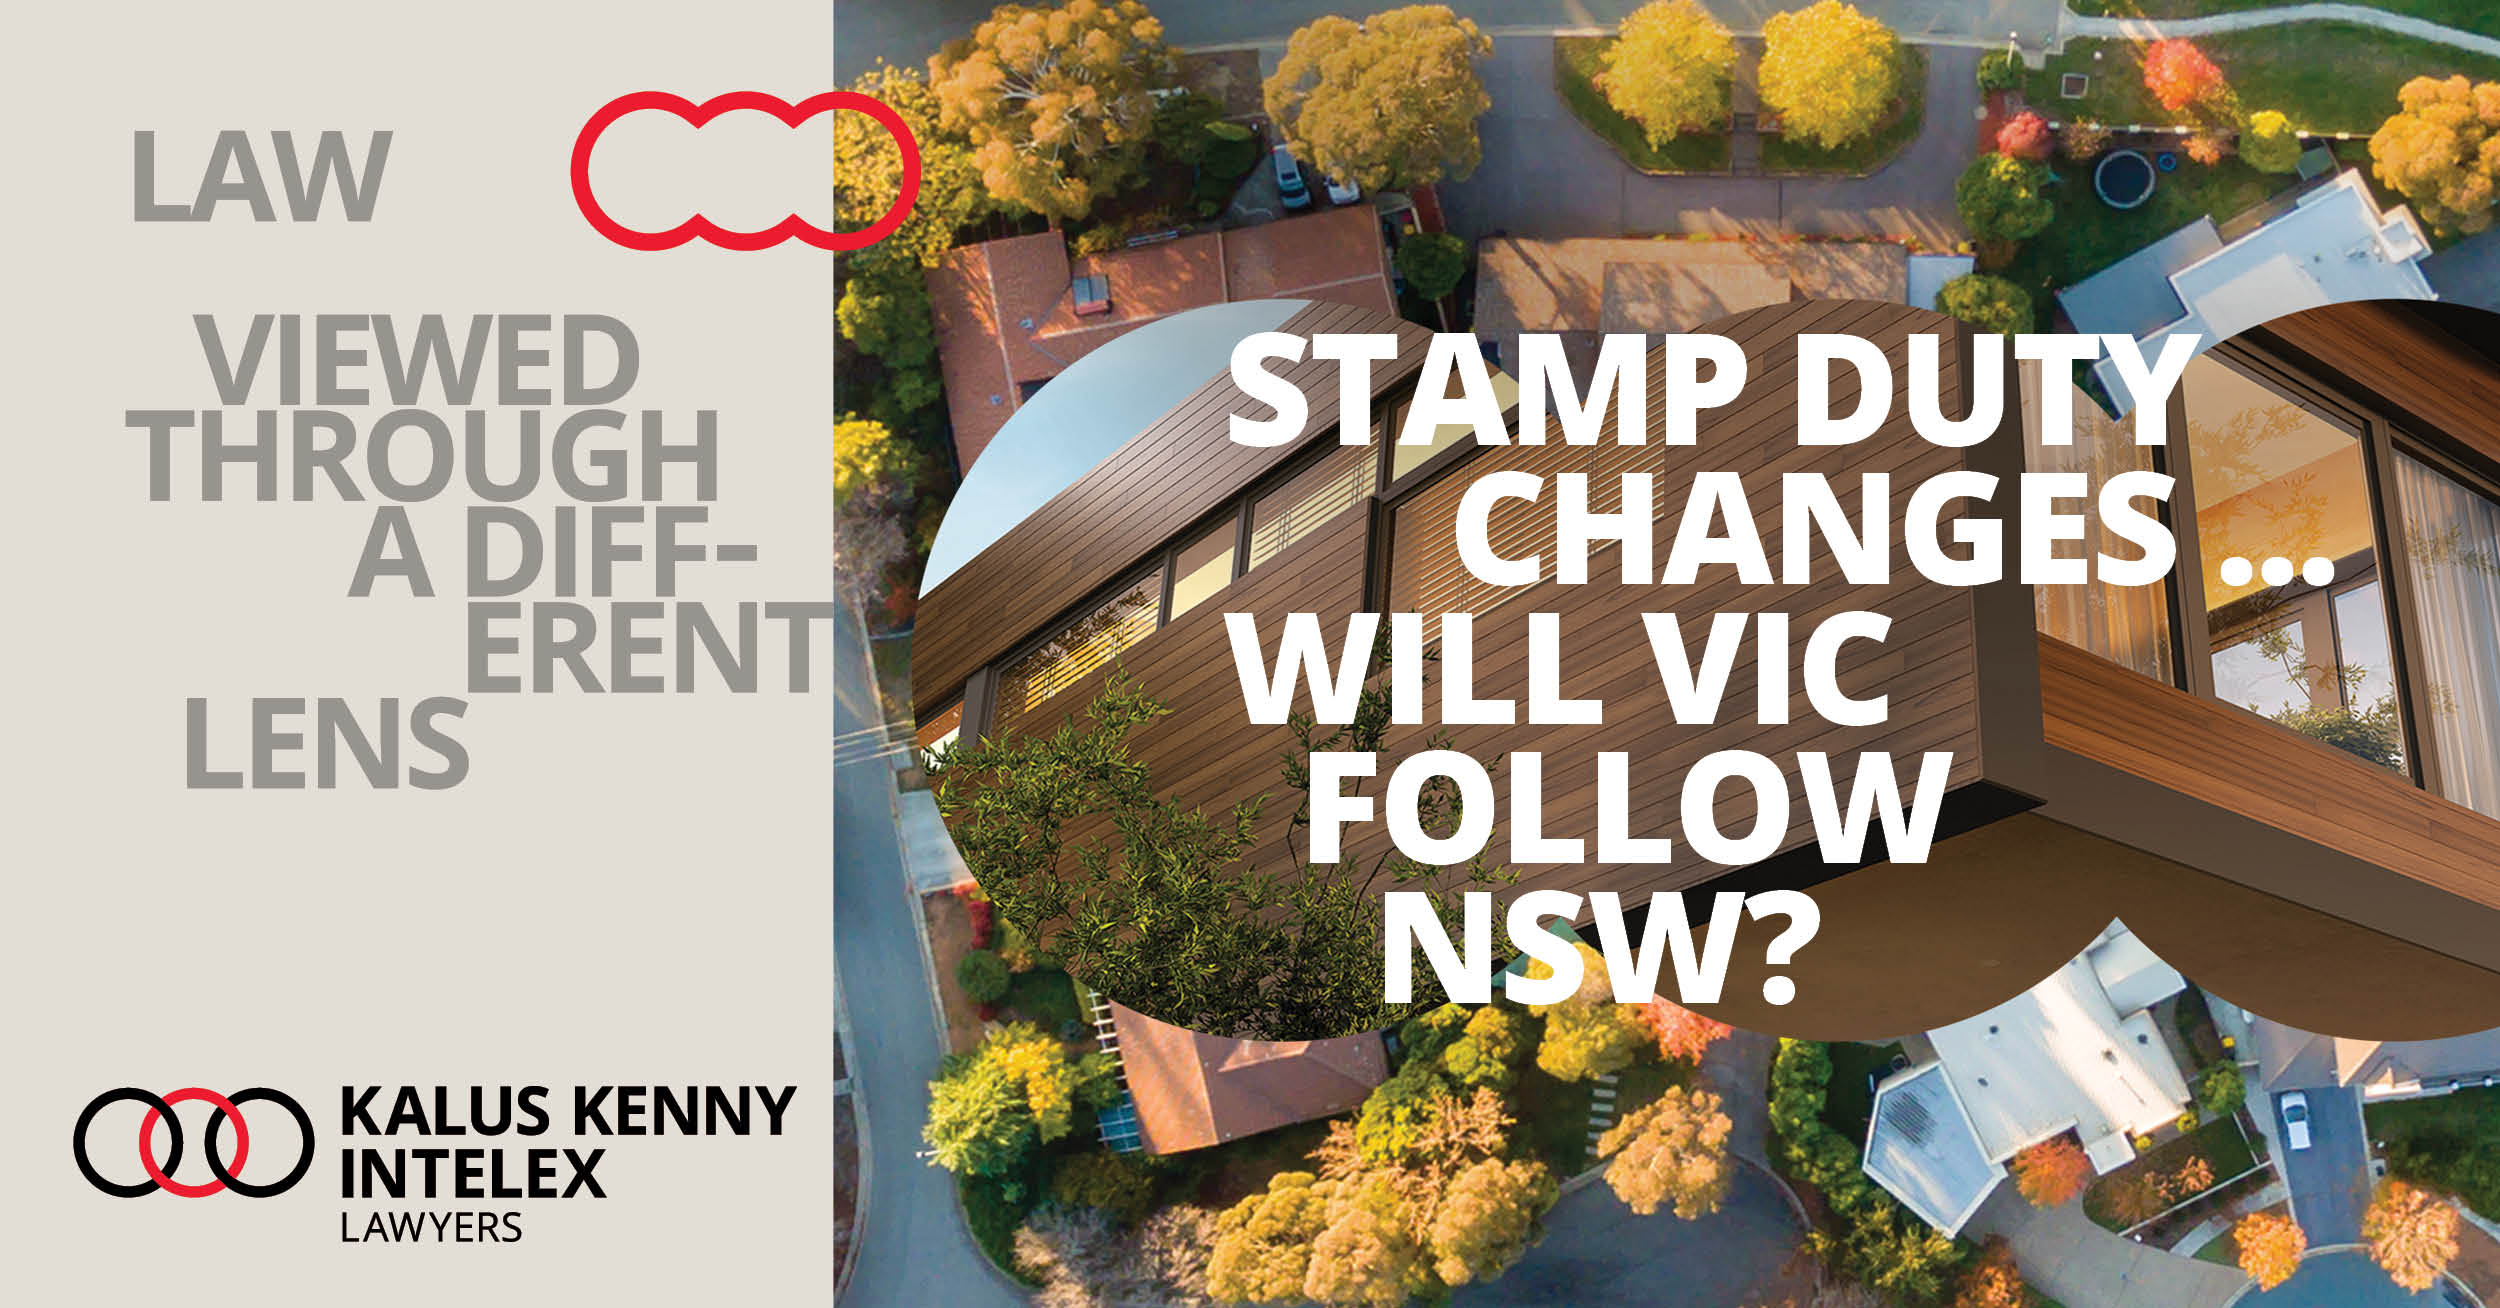 NSW’s changes to stamp duty – Will Victoria follow suit?